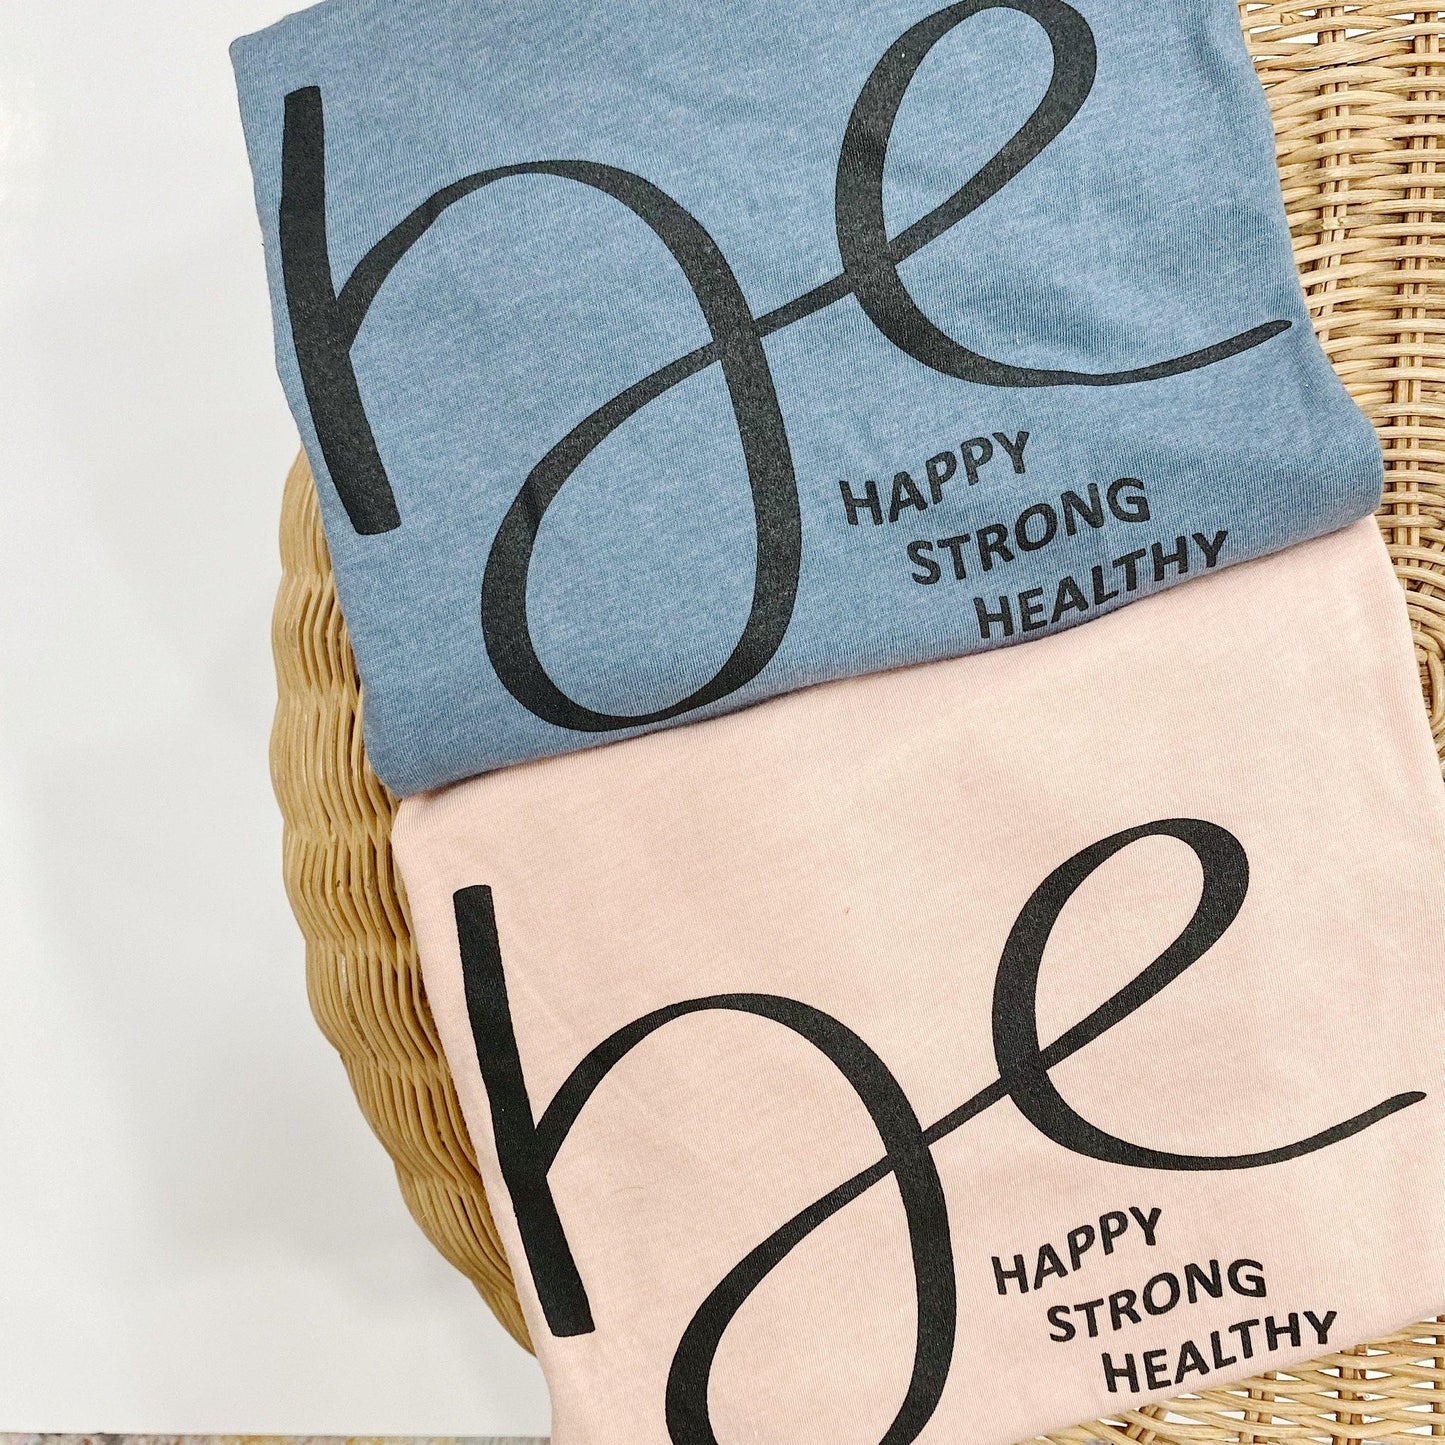 Be Happy, Strong, Healthy - Blue